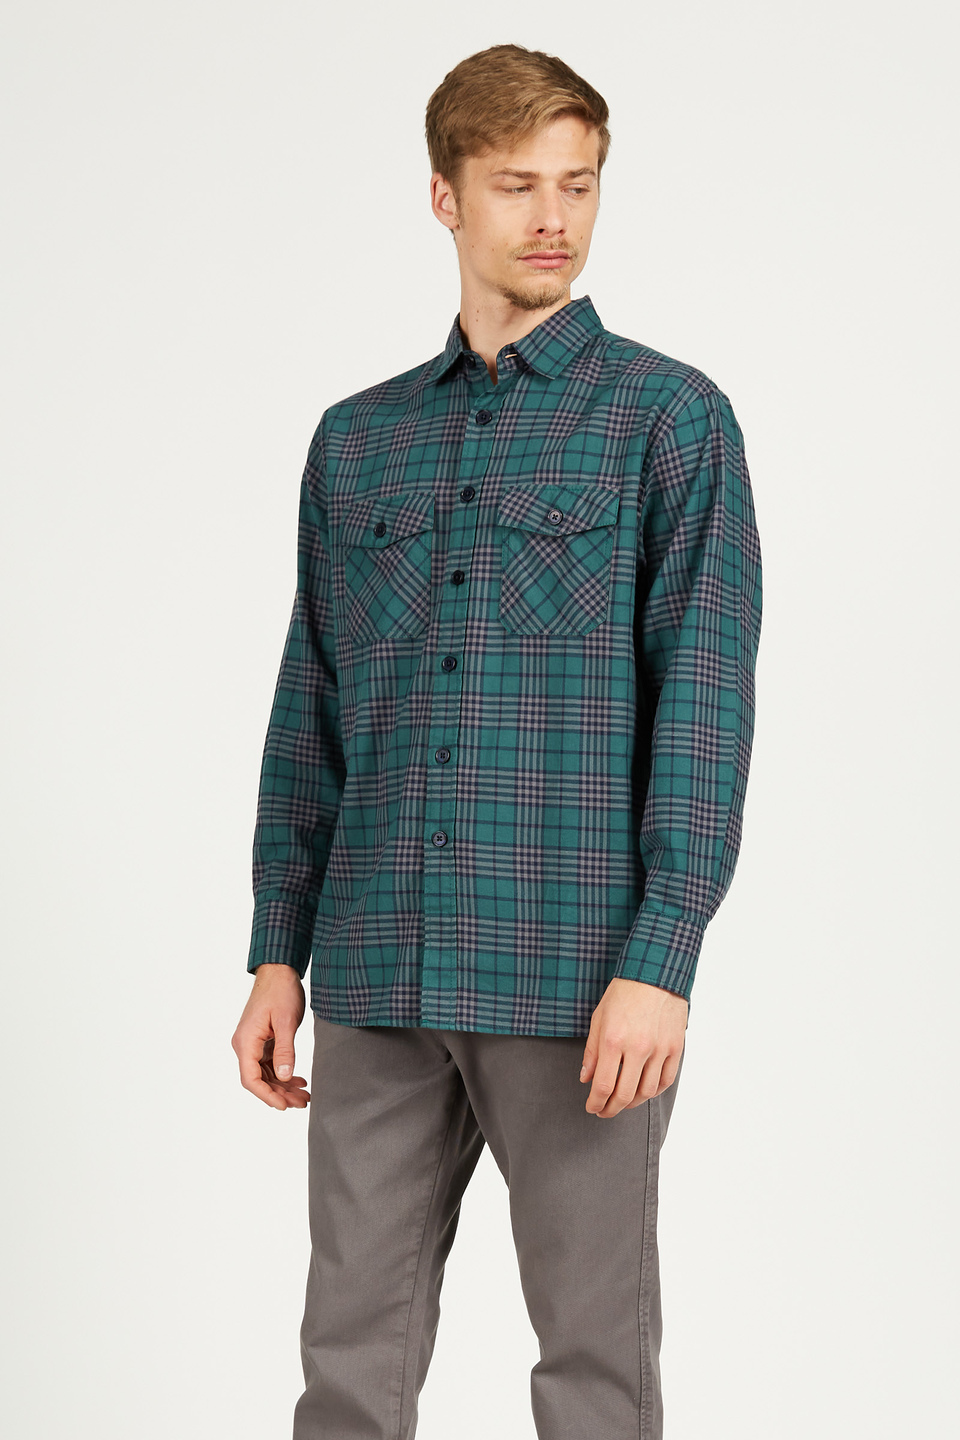 Men's shirt in cotton with long sleeves, oversized fit | La Martina - Official Online Shop